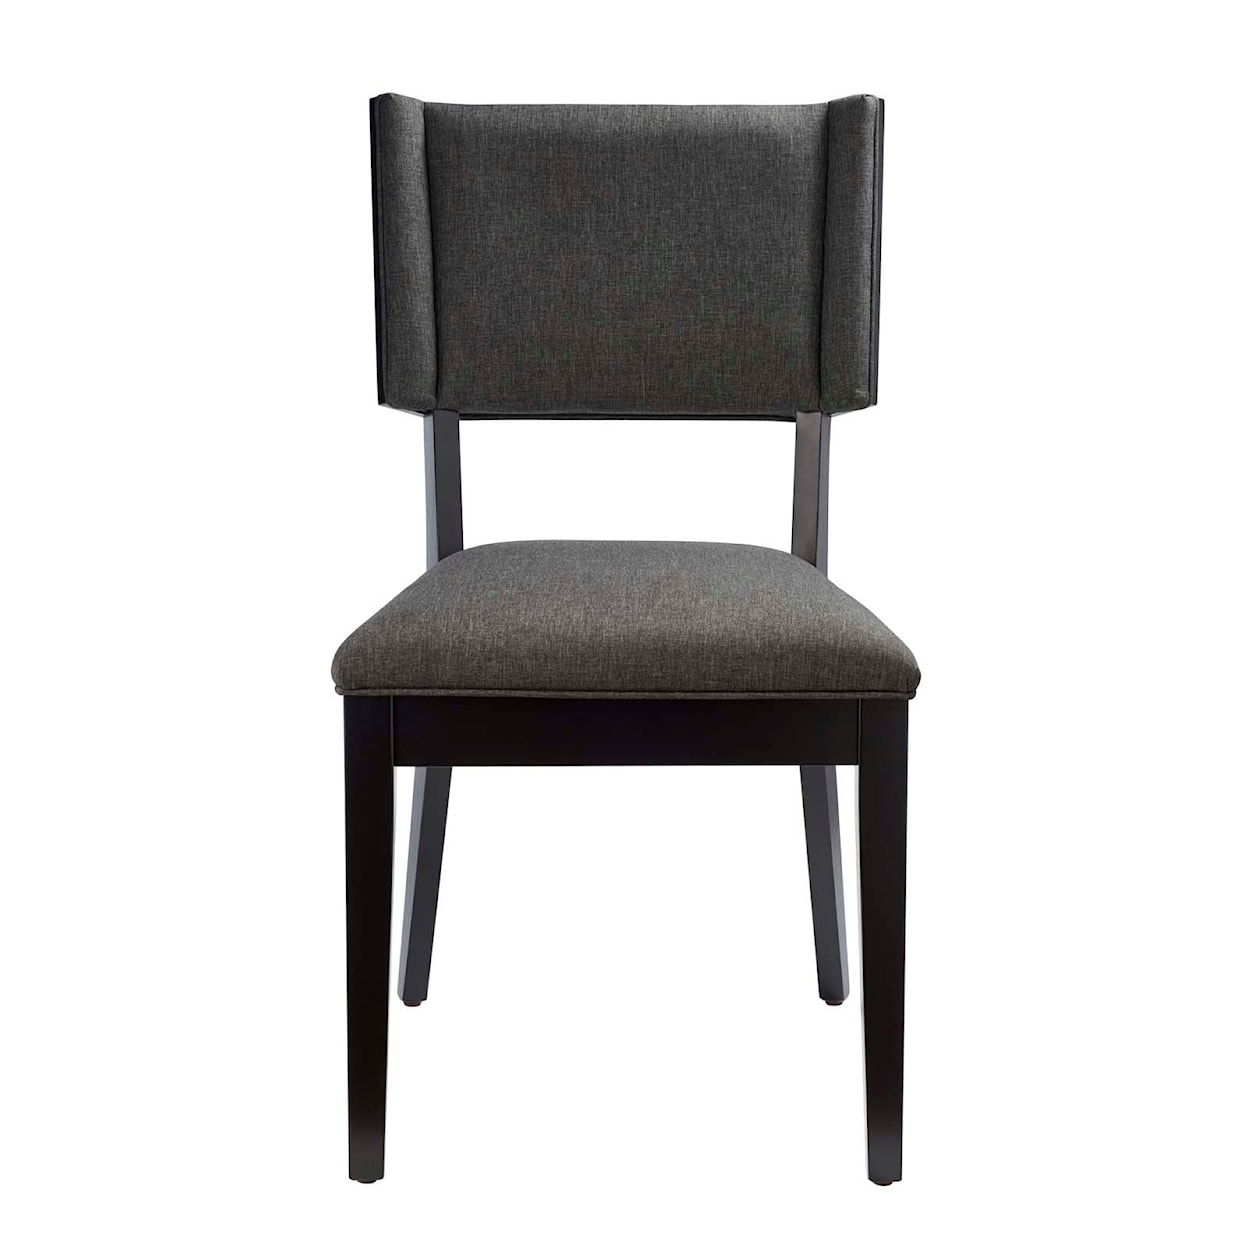 Modway Esquire Esquire Dining Chairs - Set of 2